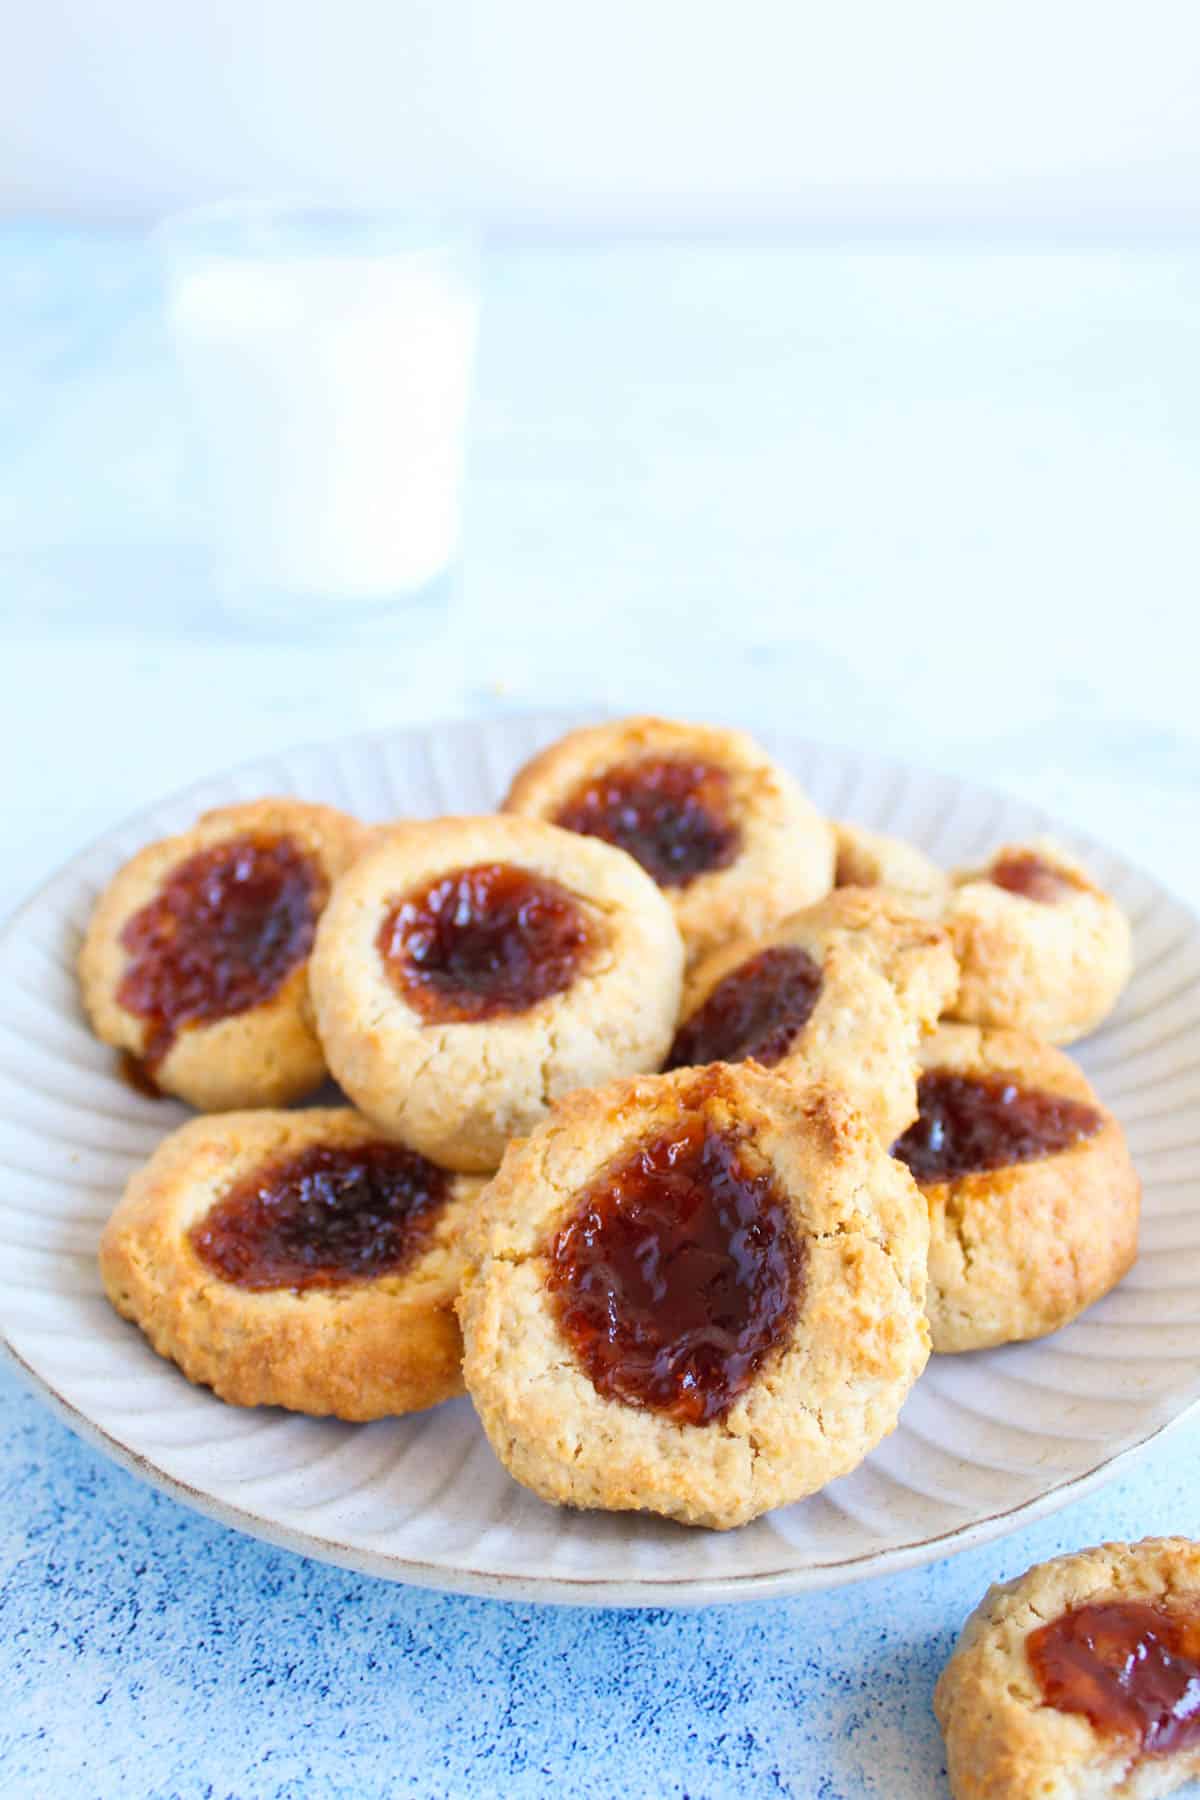 jam drop cookies on a plate served with glass of milk